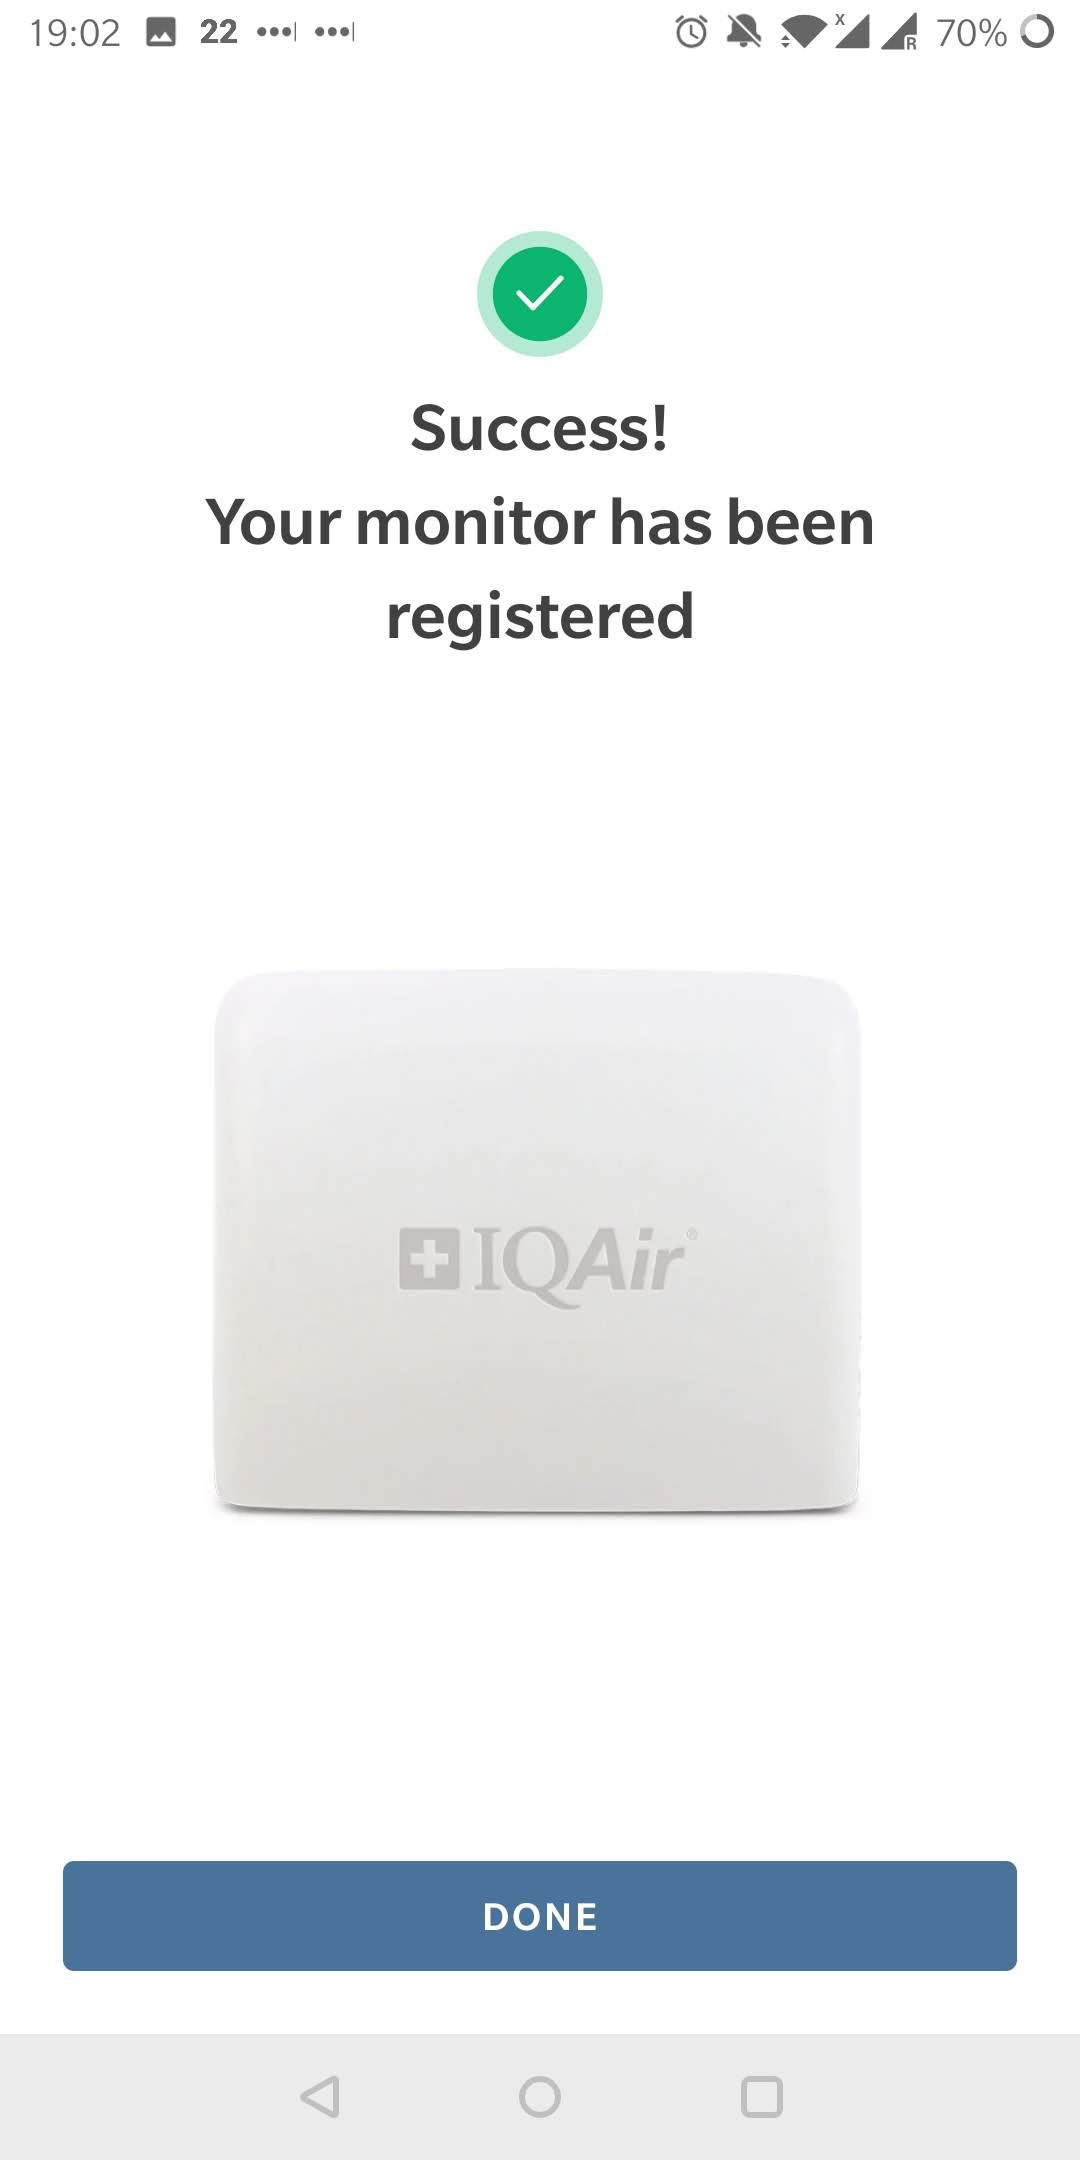 iQAir AirVisual App Outdoor Monitor Registered